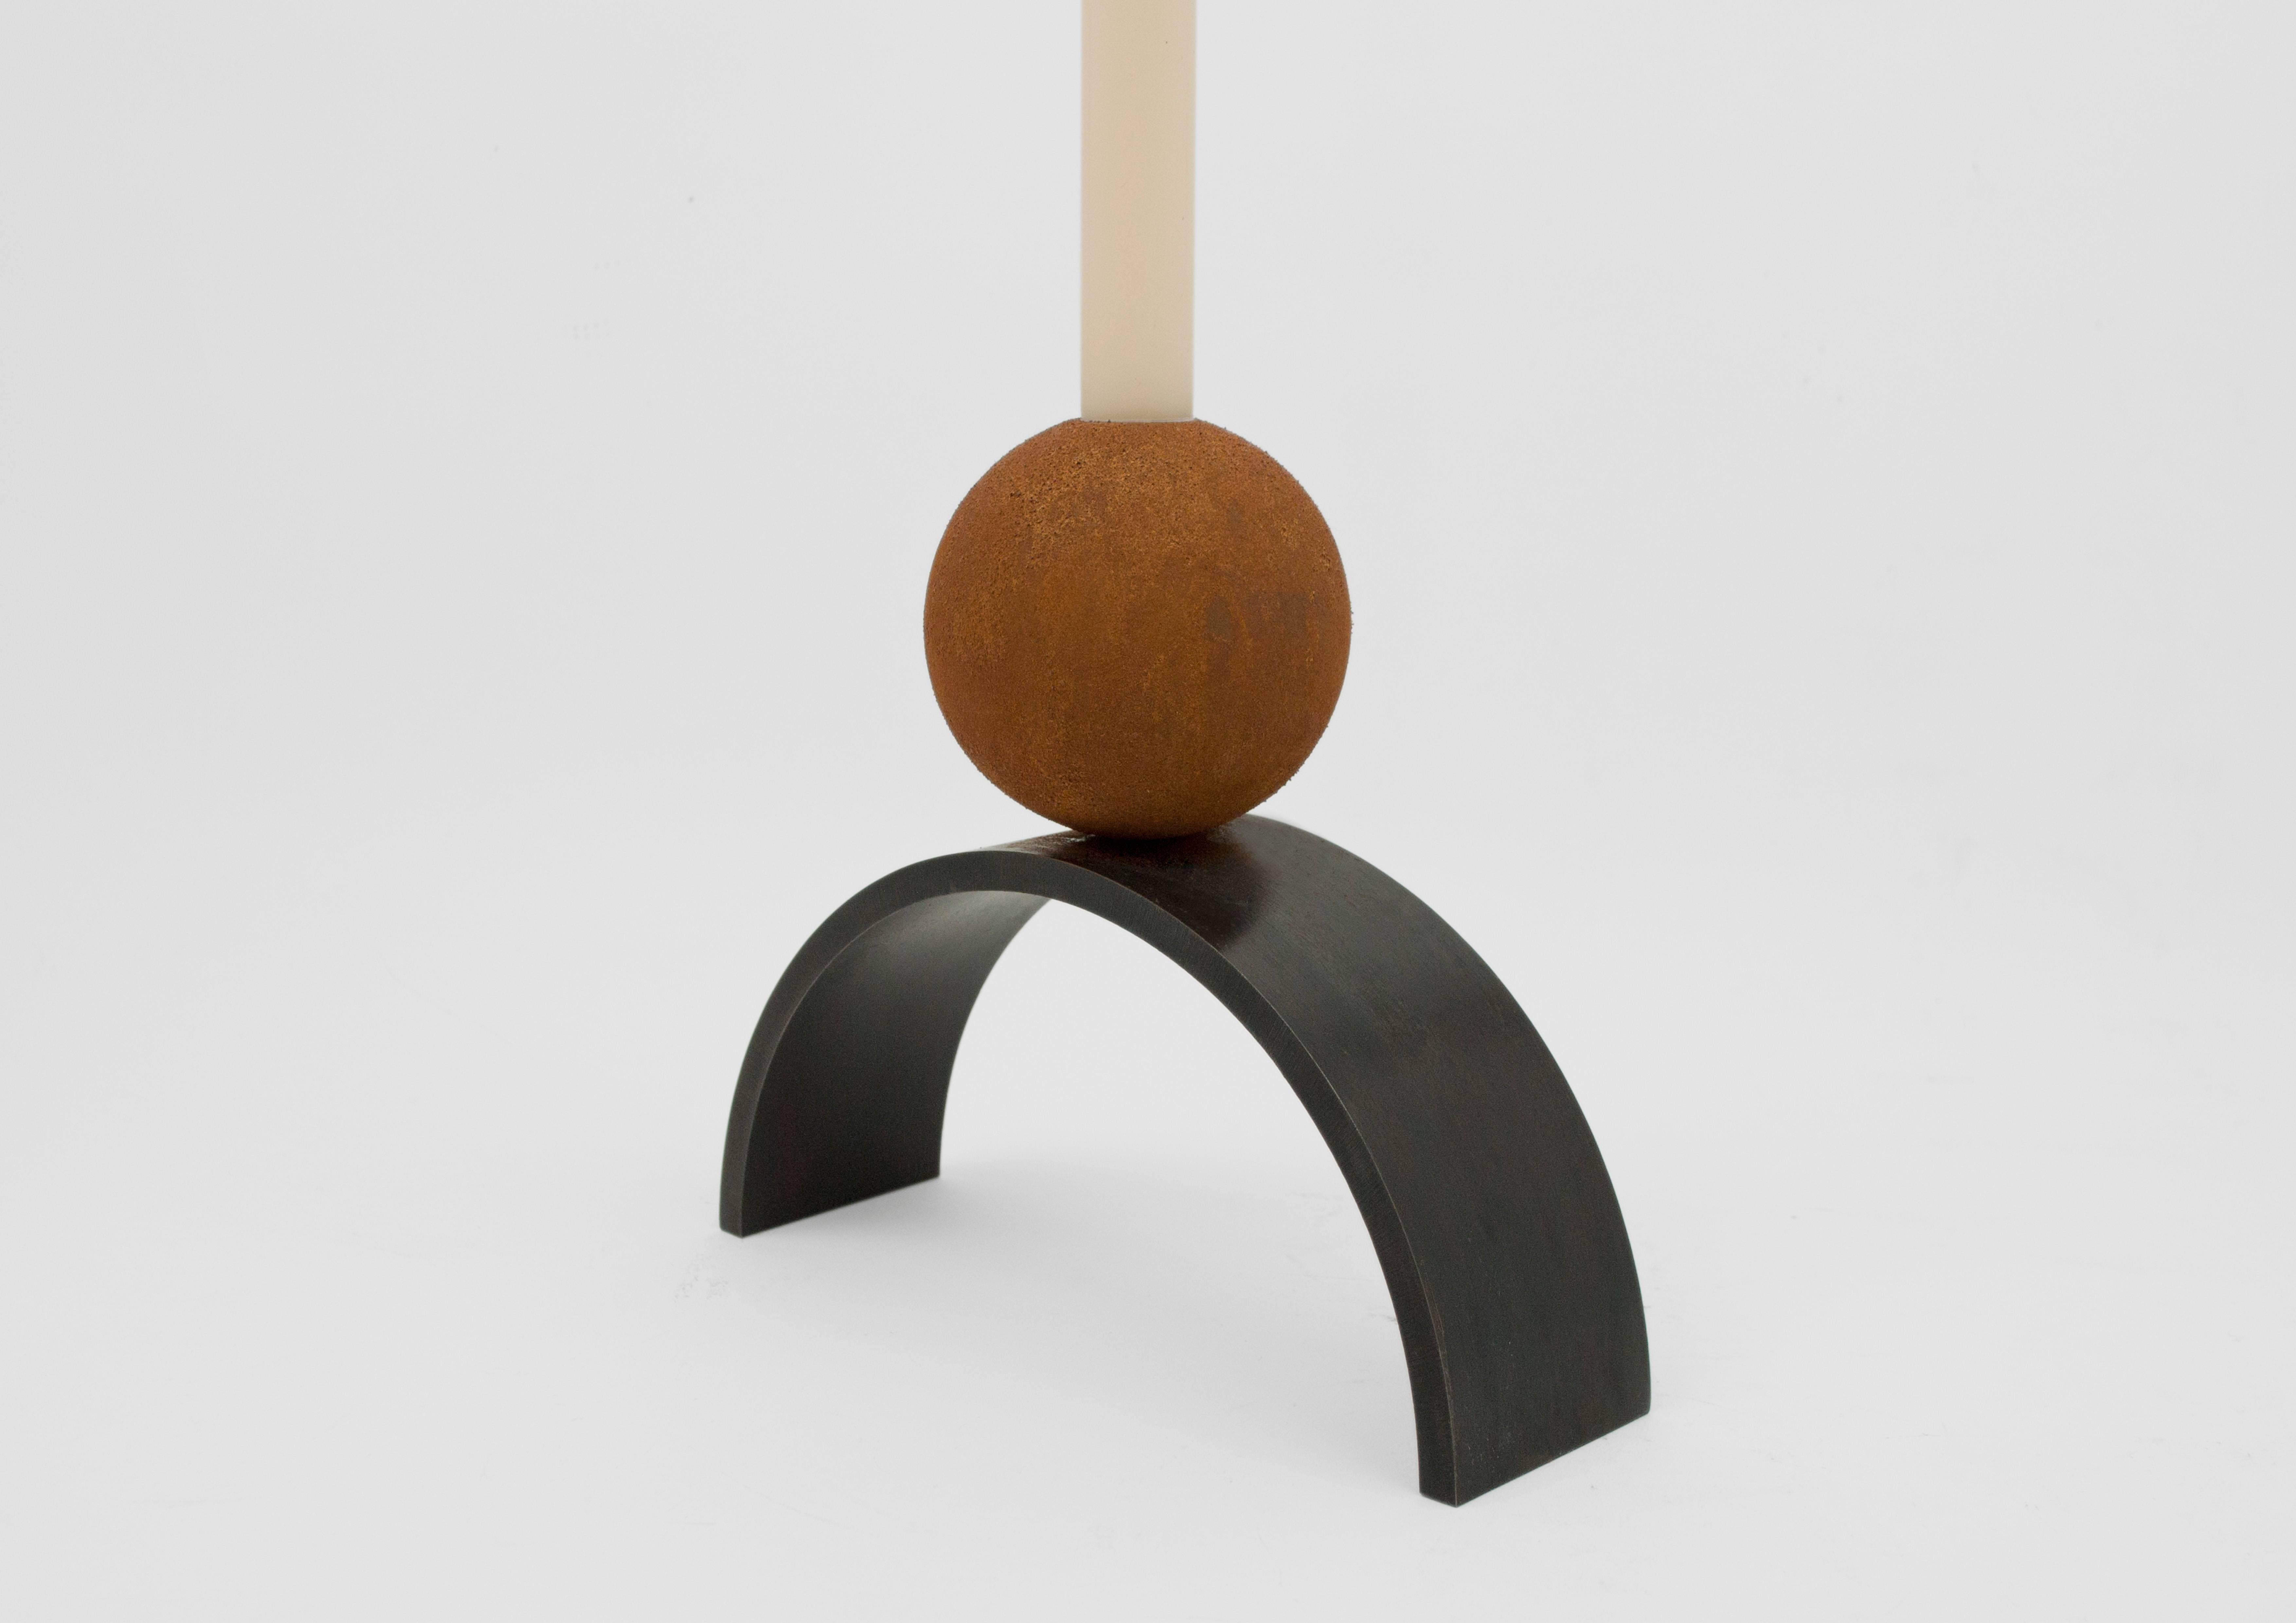 Louis Jobst' arch and ball extra large candleholders are little monuments to have in the home. The form derives from paintings by Jobst of monumental shapes and forms.

Each candle stick holder is handmade from mild steel and patinated black. The